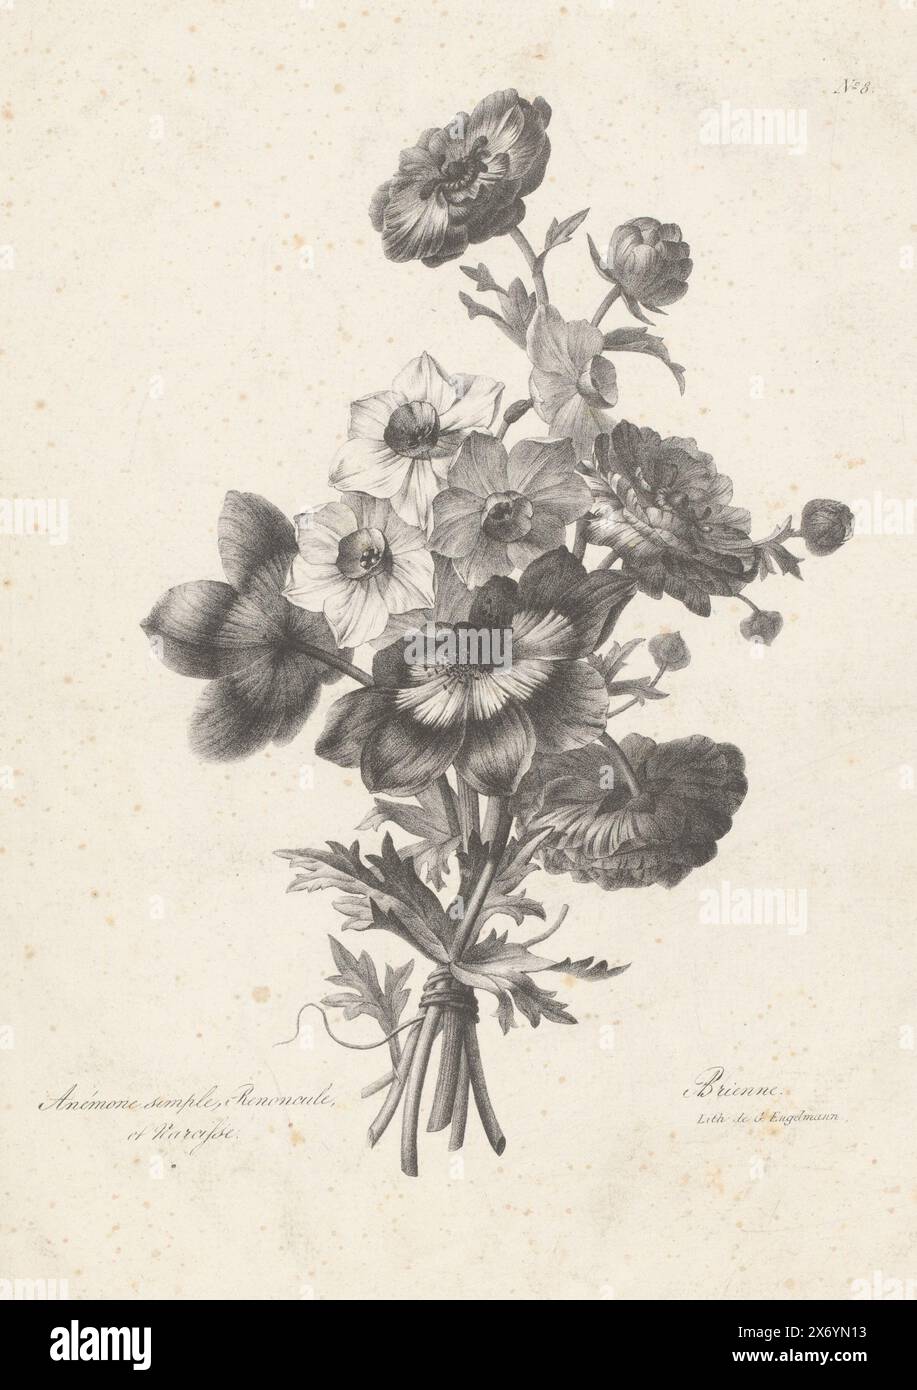 Bouquet with anemone, buttercup and daffodil, Anémone simple, renoncule, et narcisse (title on object), Flower bouquets by Auguste Piquet de Brienne (series title), print, print maker: Auguste Piquet de Brienne, (mentioned on object), printer: Gottfried Engelmann, (mentioned on object), Paris, 1817 - 1831, paper, height, 362 mm × width, 262 mm Stock Photo